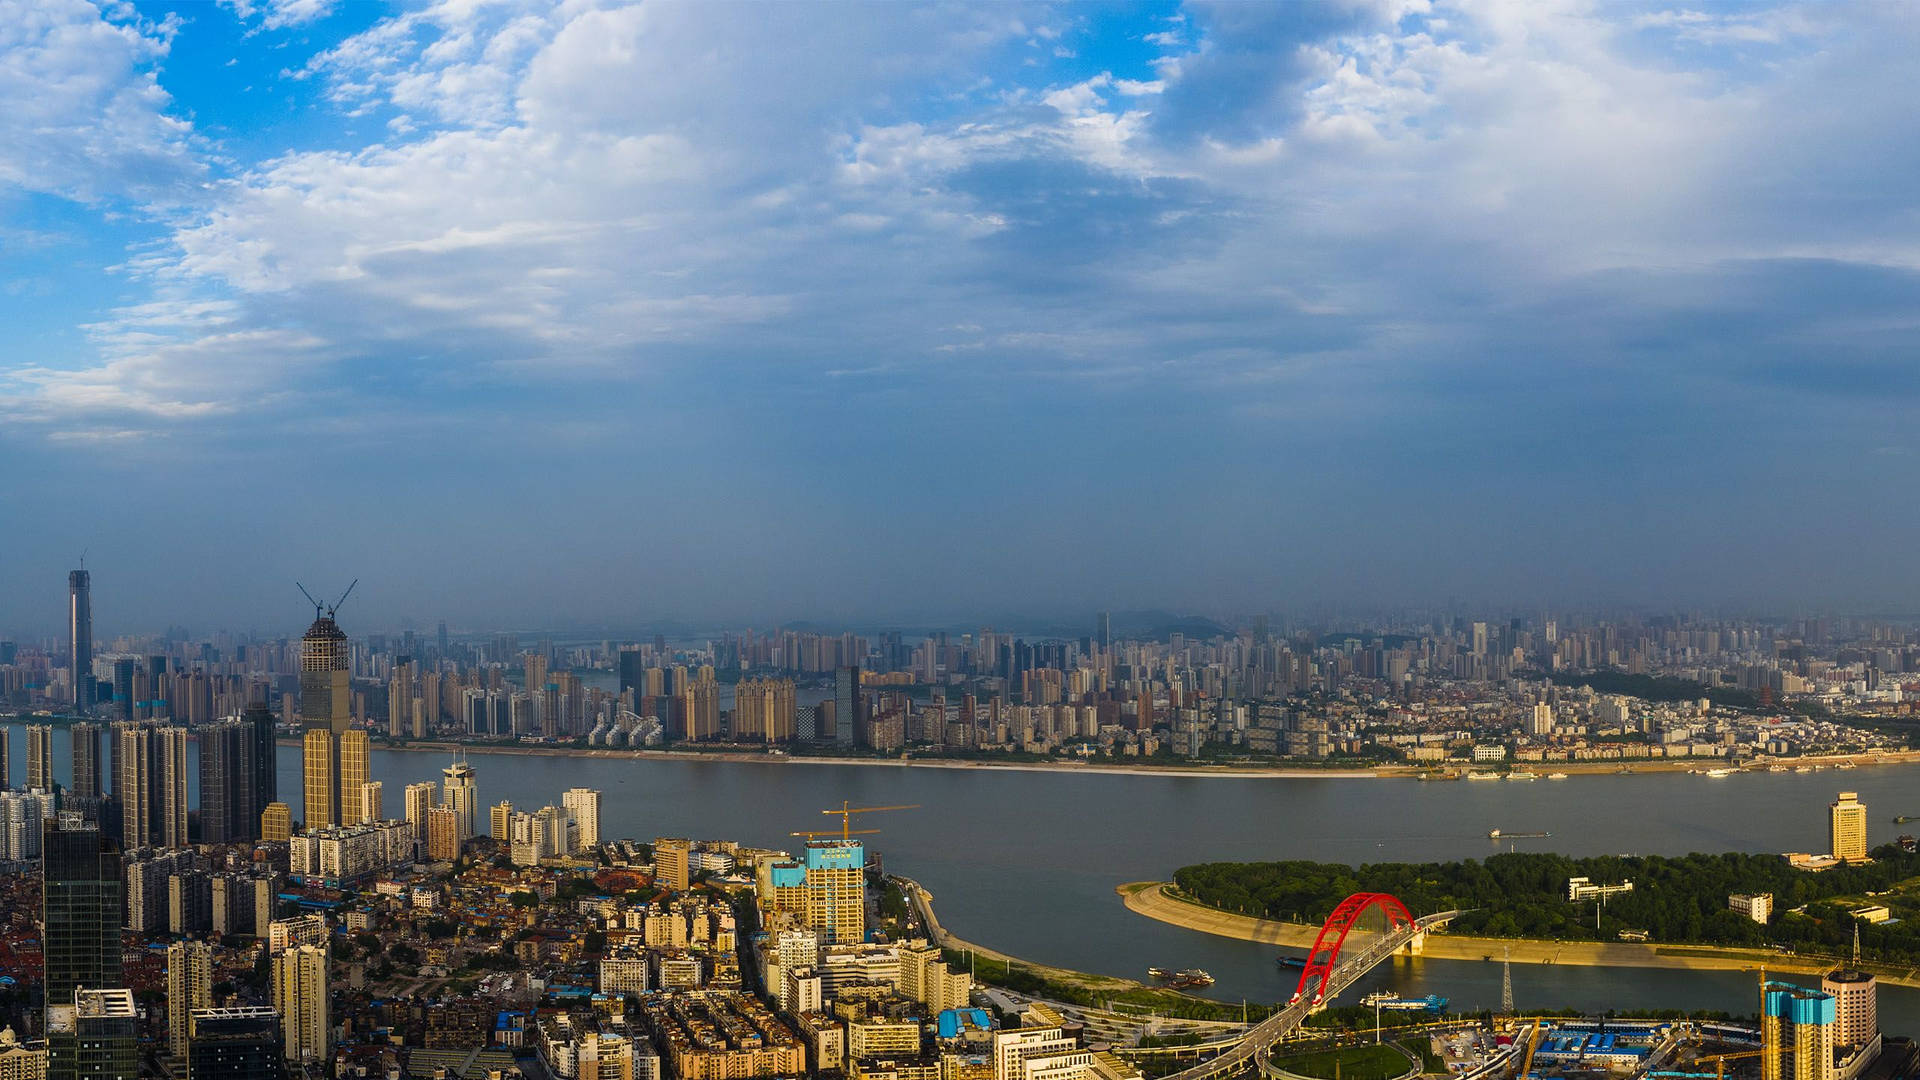 Wuhanaerial View: Wuhan Luftvy Wallpaper